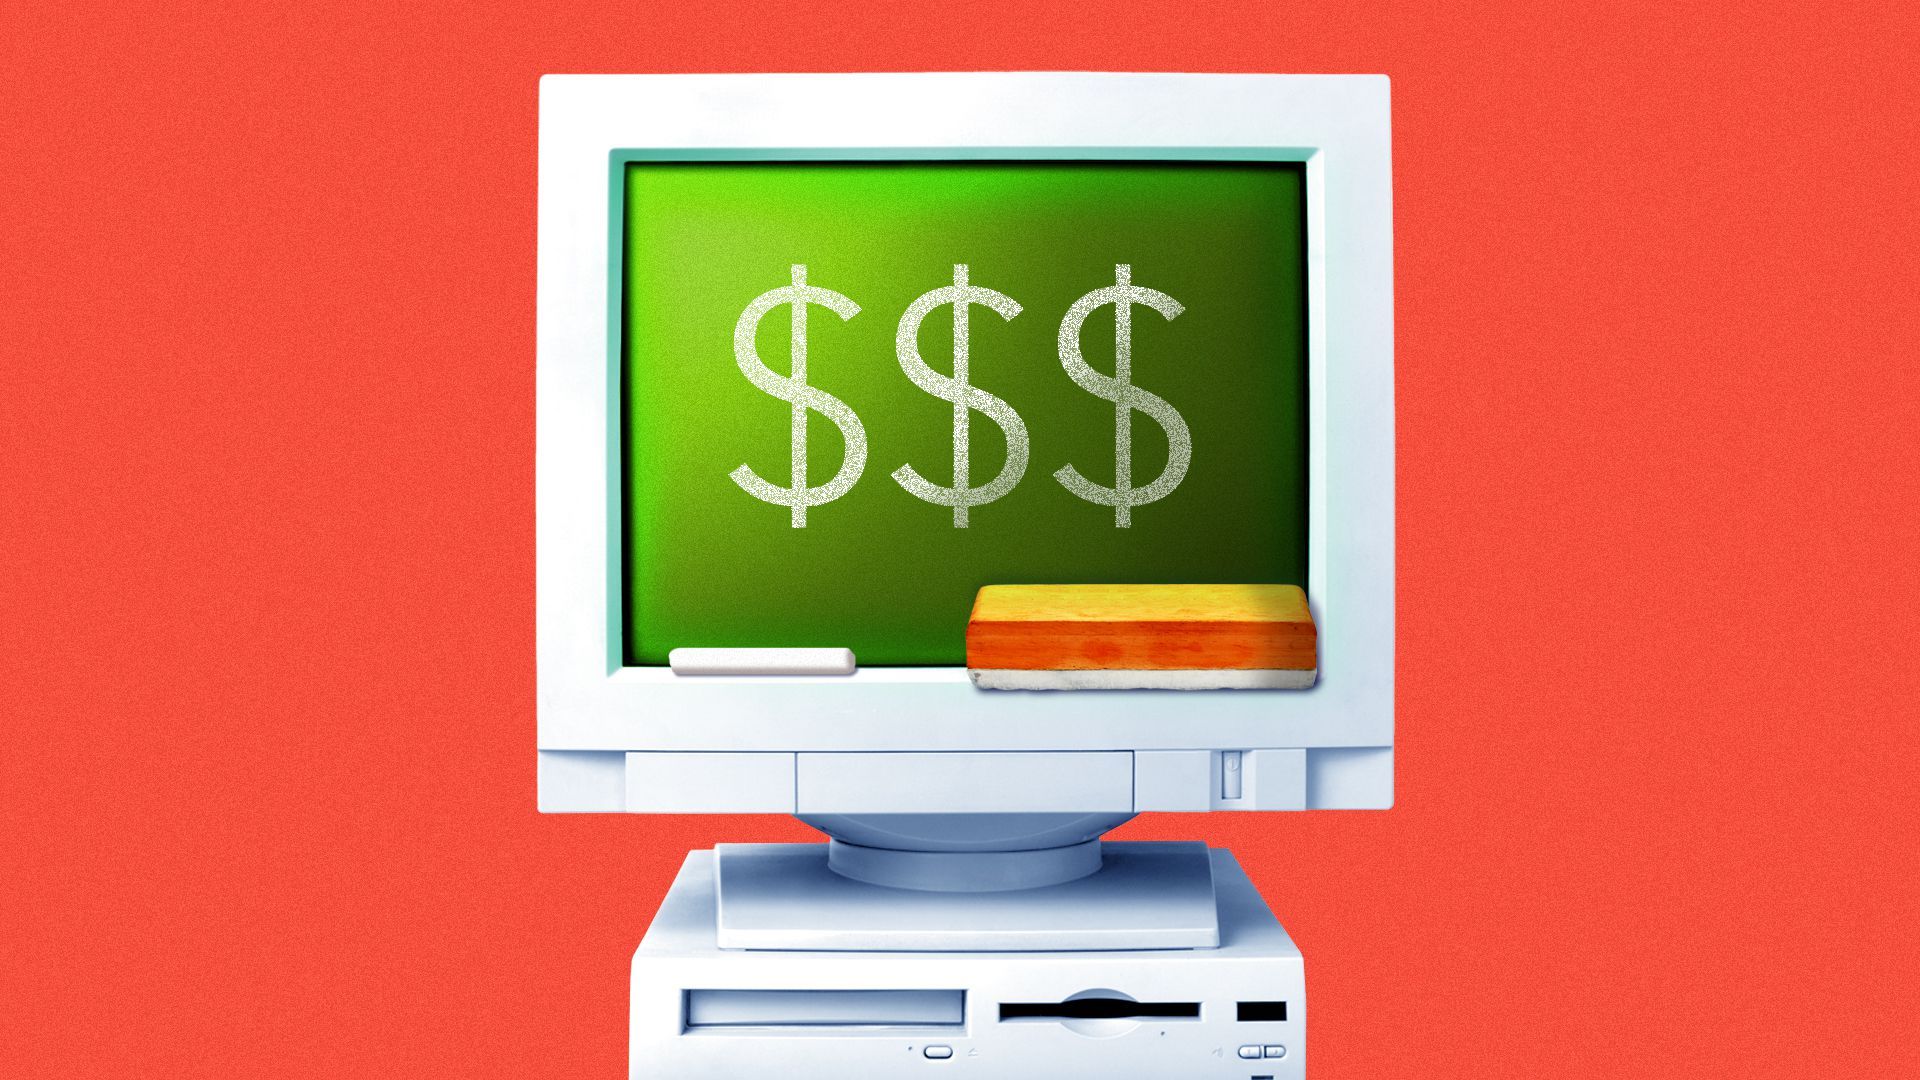 Illustration of a computer with a chalkboard screen featuring dollar signs